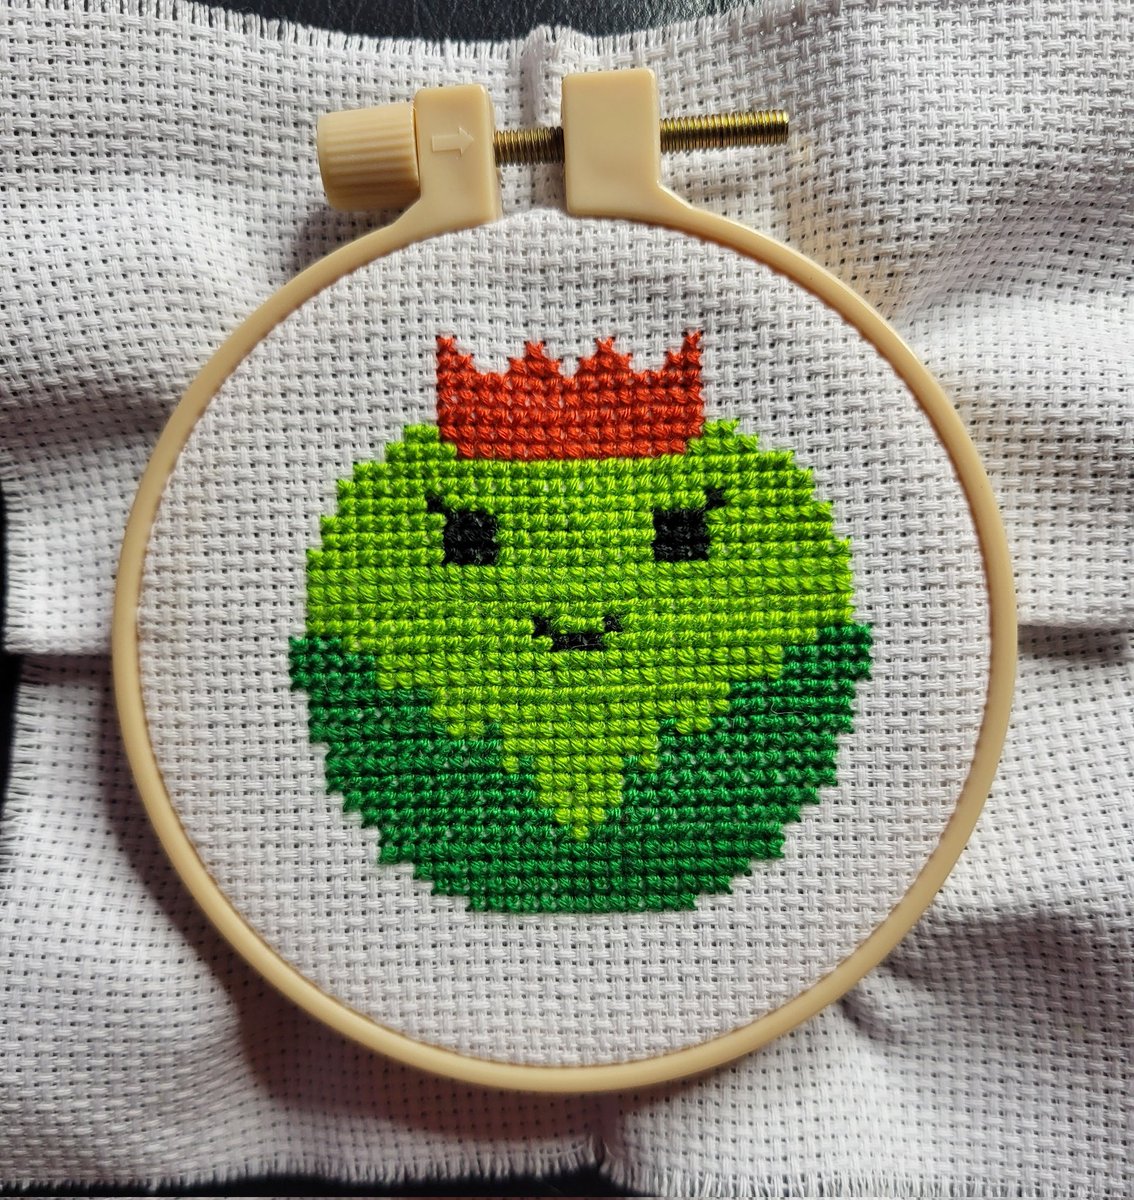 Sproutalicious!
Love them or hate them, you can't deny that this is one very happy sprout in their party hat.
🎄
#crosstich #christmascrafts #christmascrossstitch #sprout #sproutcrossstitch #xstitch #crossstitchersofinstagram #xstitchersofinstagram
instagram.com/p/C0ZYpVrshpt/…